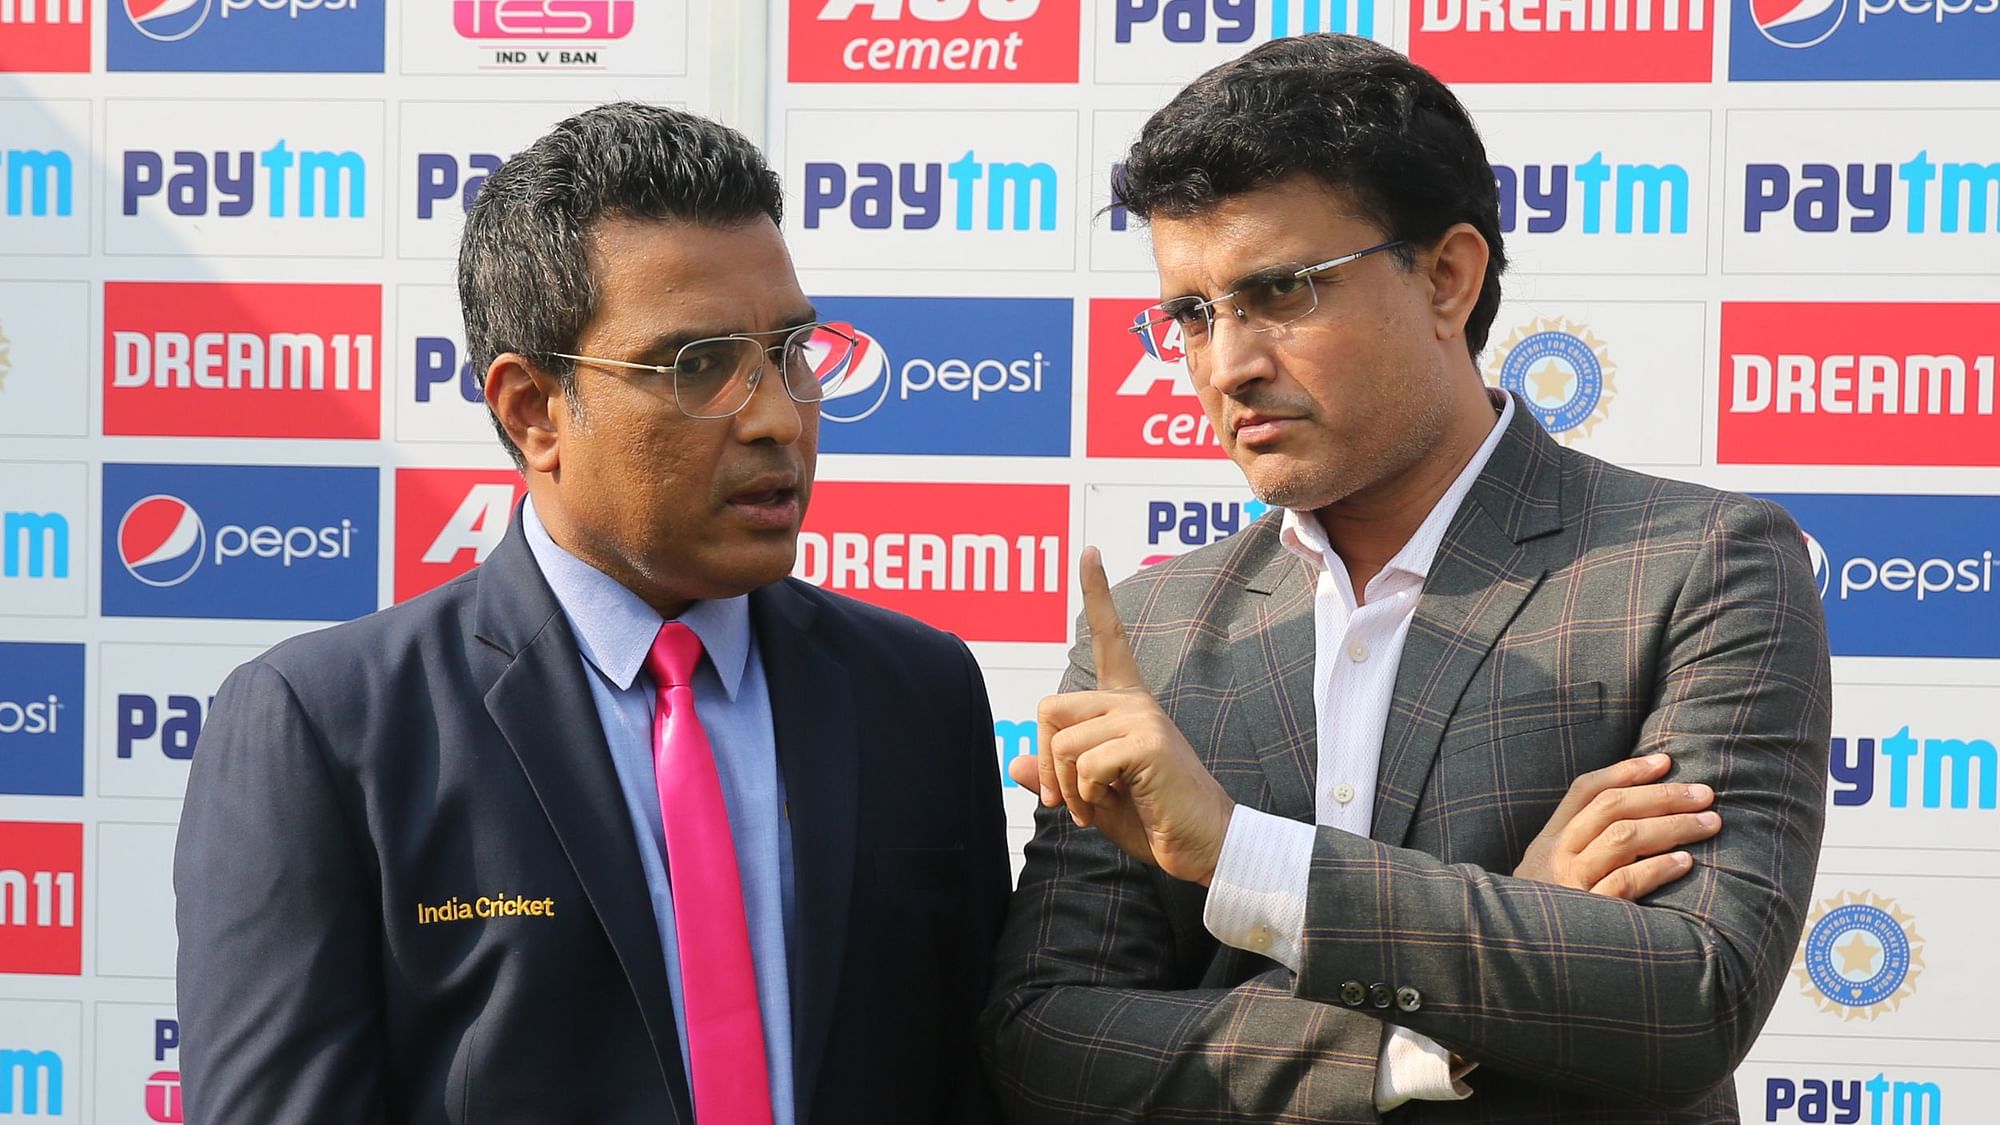 Sanjay Manjrekar has reportedly written to the BCCI to be reinstated as a commentator.